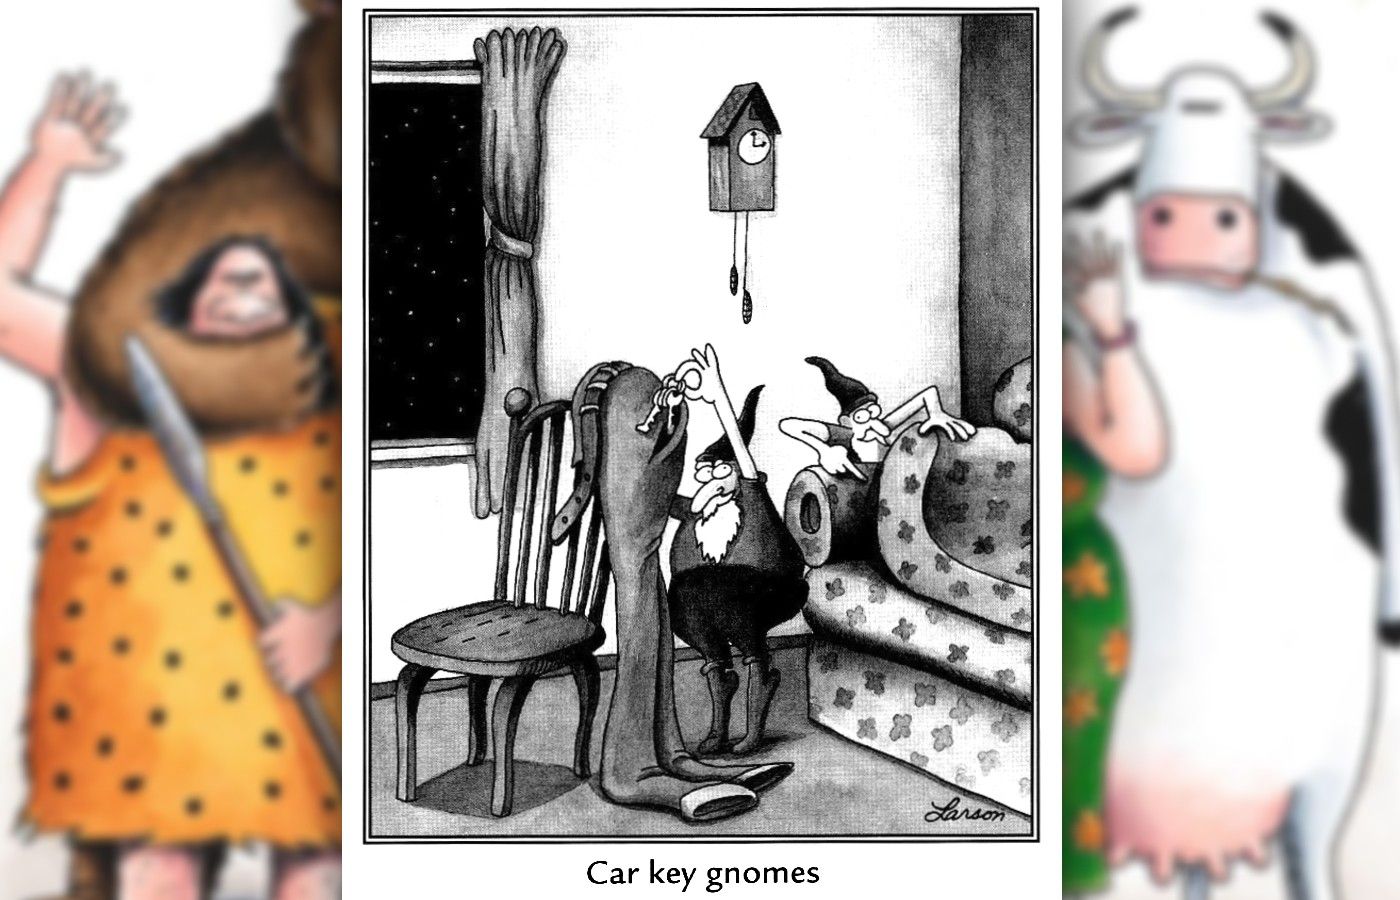 the far side comic depicting car key gnomes stealing your keys during the night